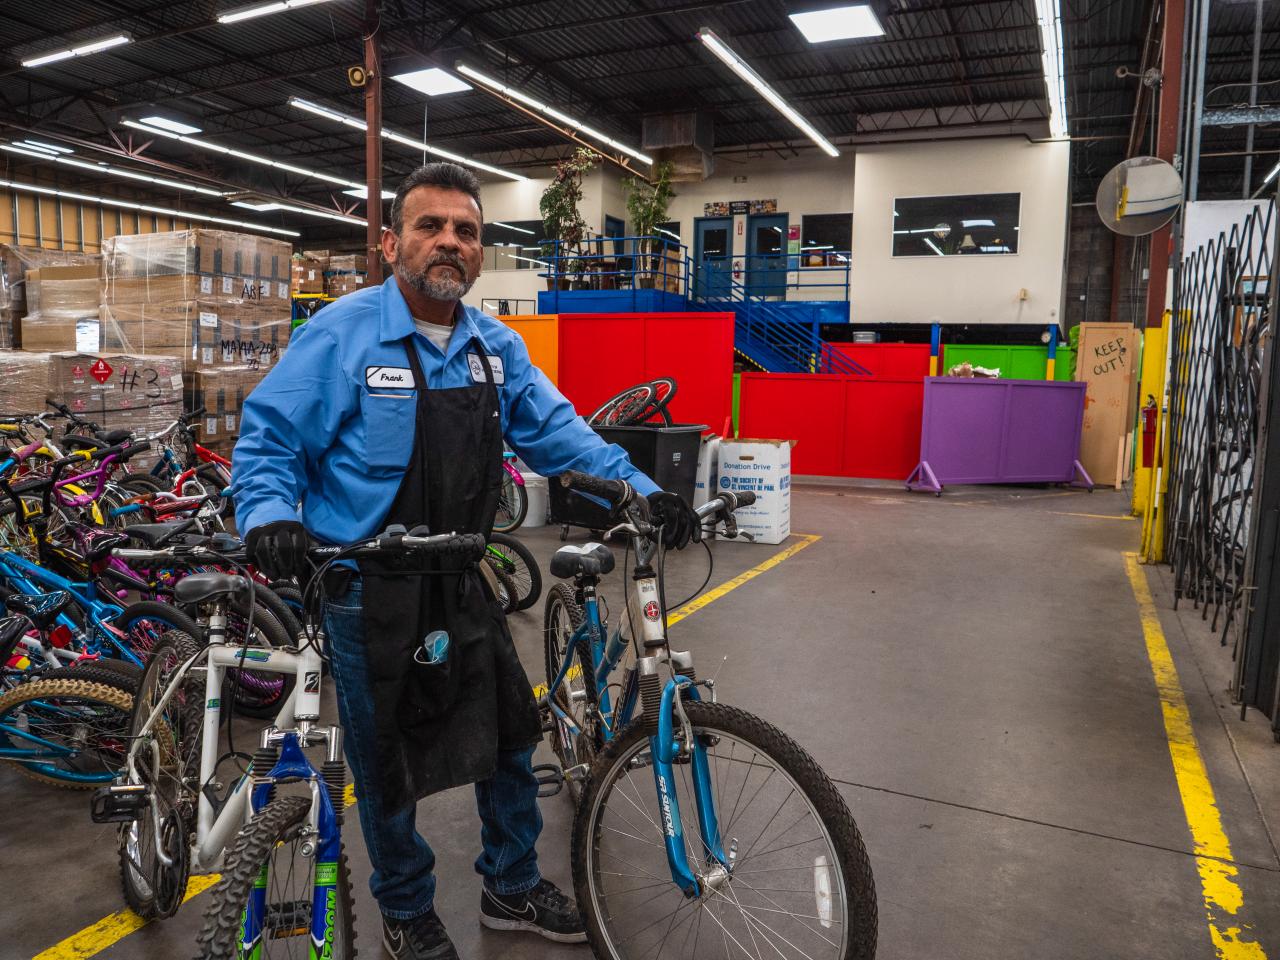 Frank with the bikes in the bike shop